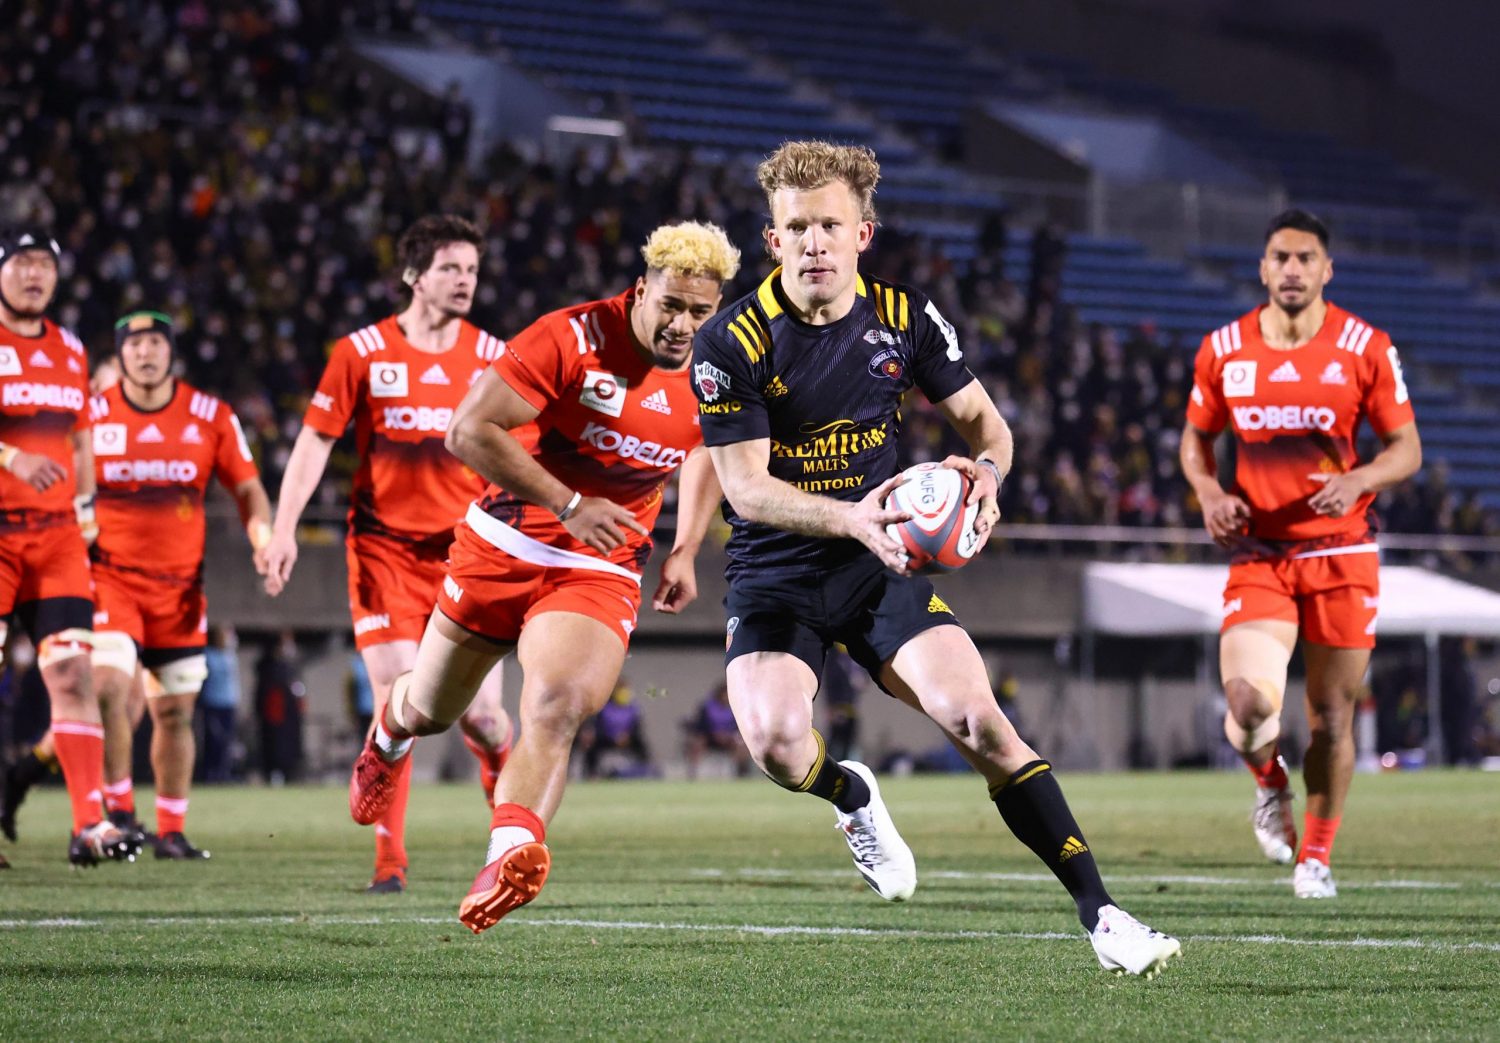 JAPAN SPORTS NOTEBOOK Damian McKenzie Racking Up a Plethora of Points for Title-Chasing Sungoliath JAPAN Forward